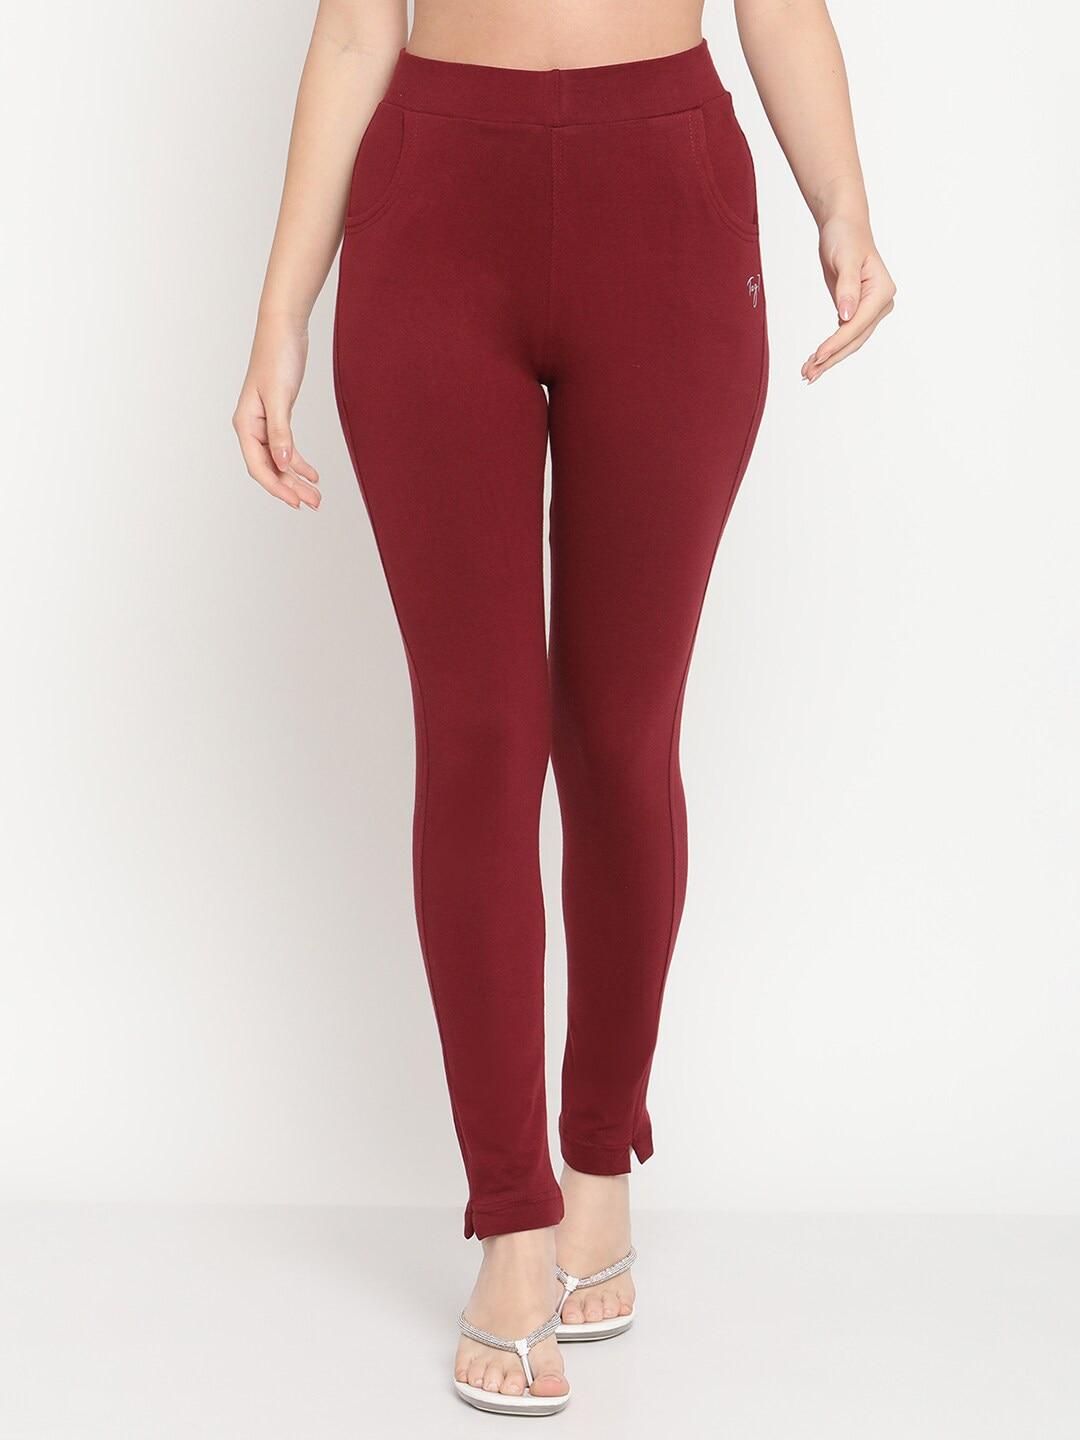 tag 7 women maroon solid jeggings